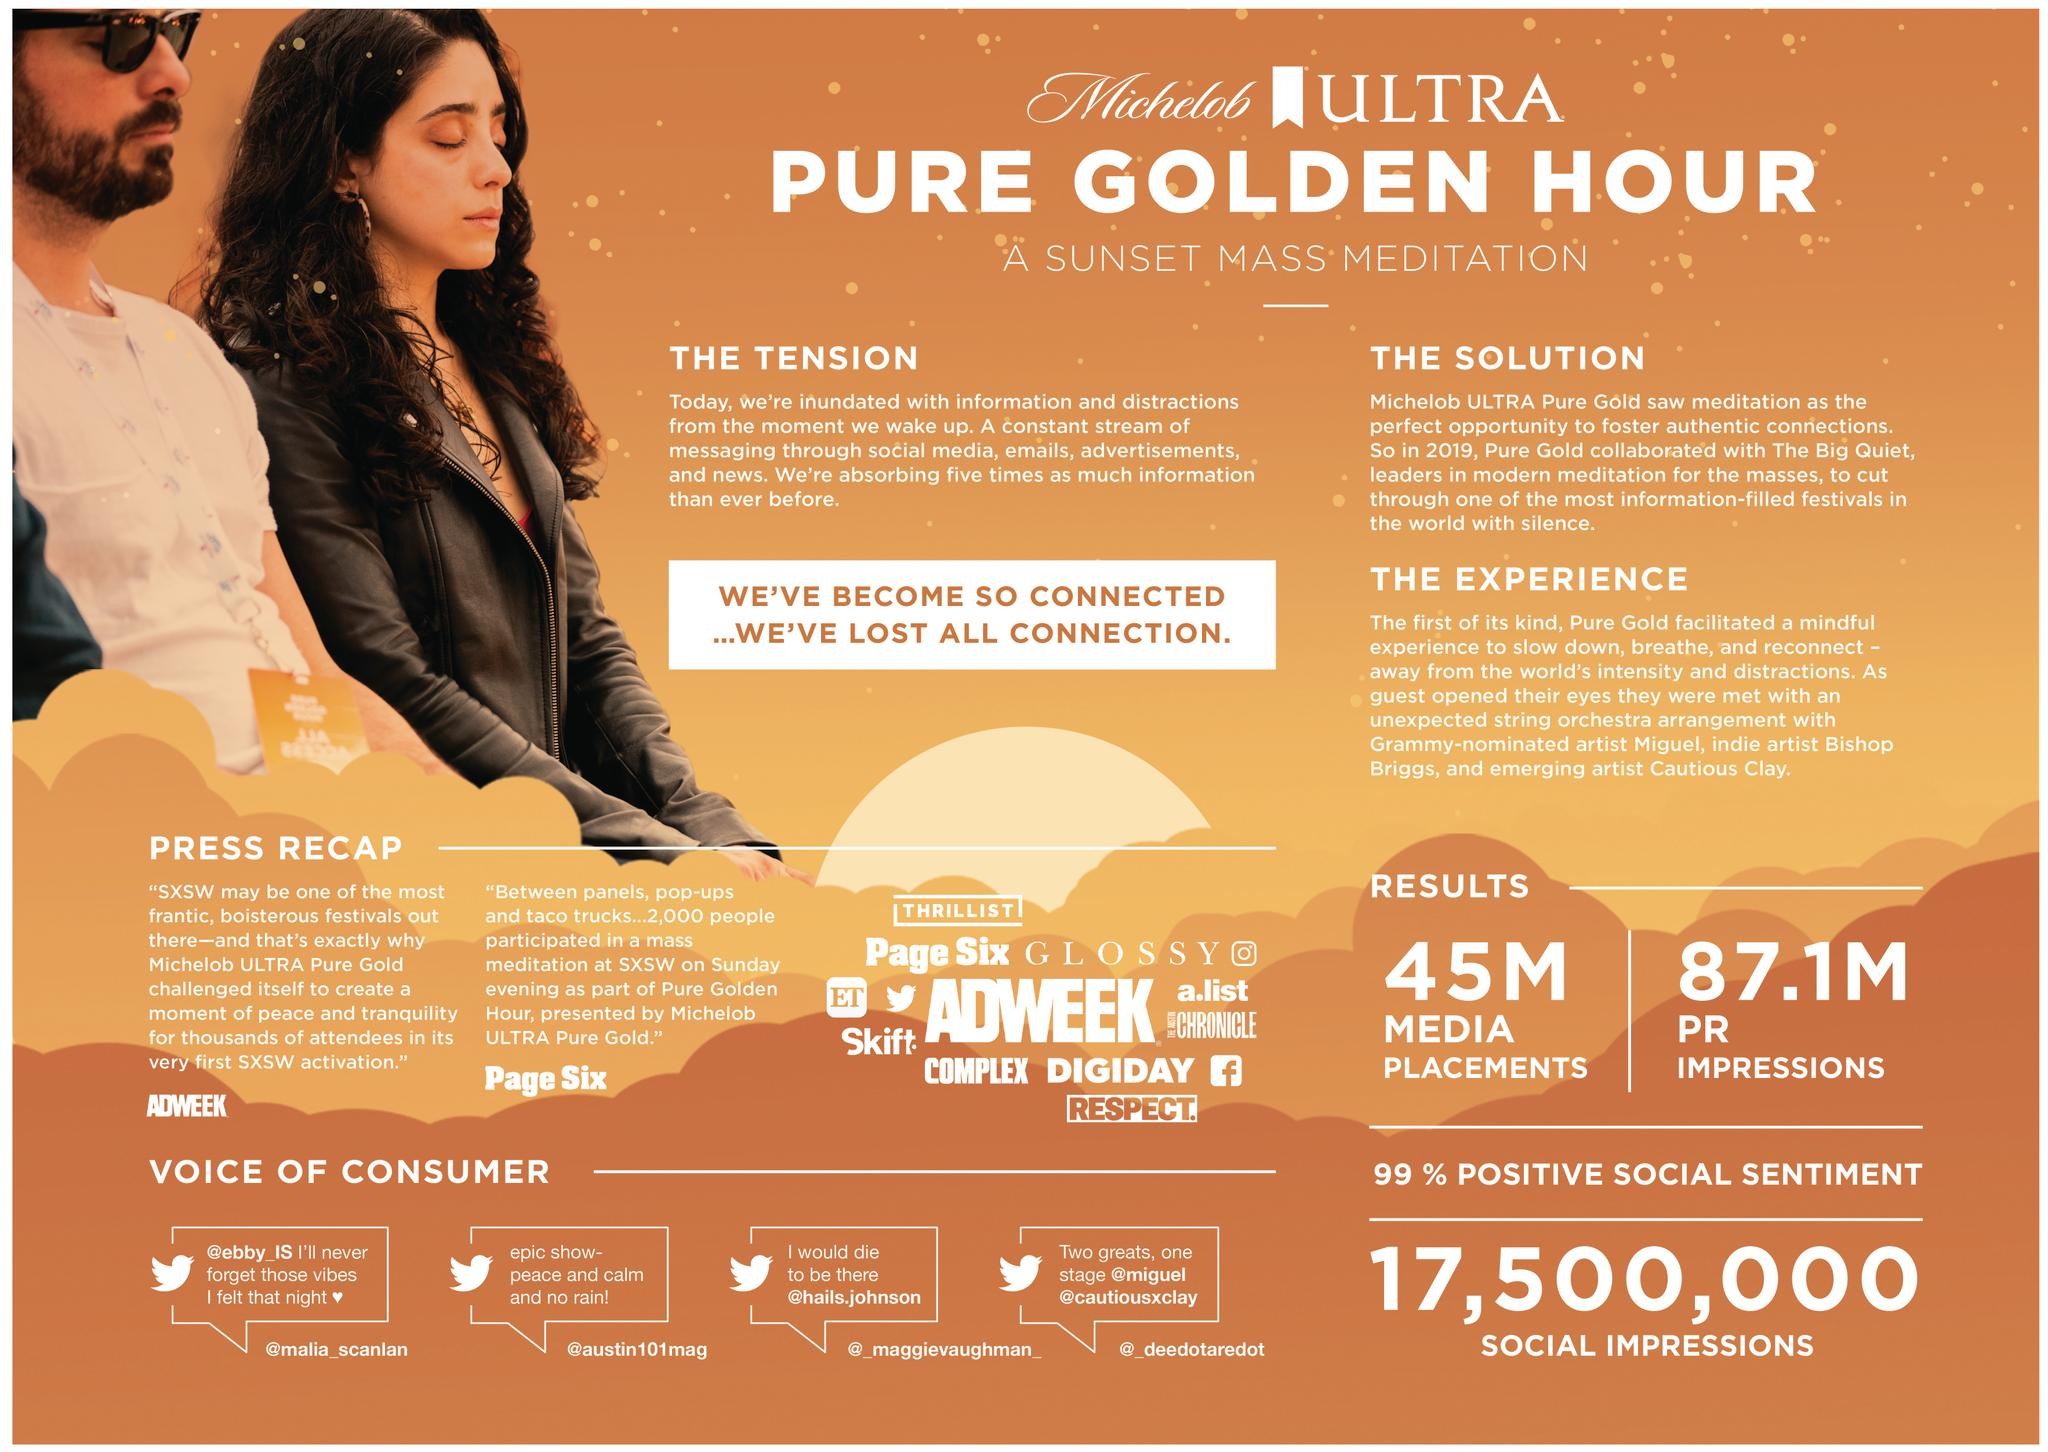 Michelob ULTRA – Pure Golden Hour